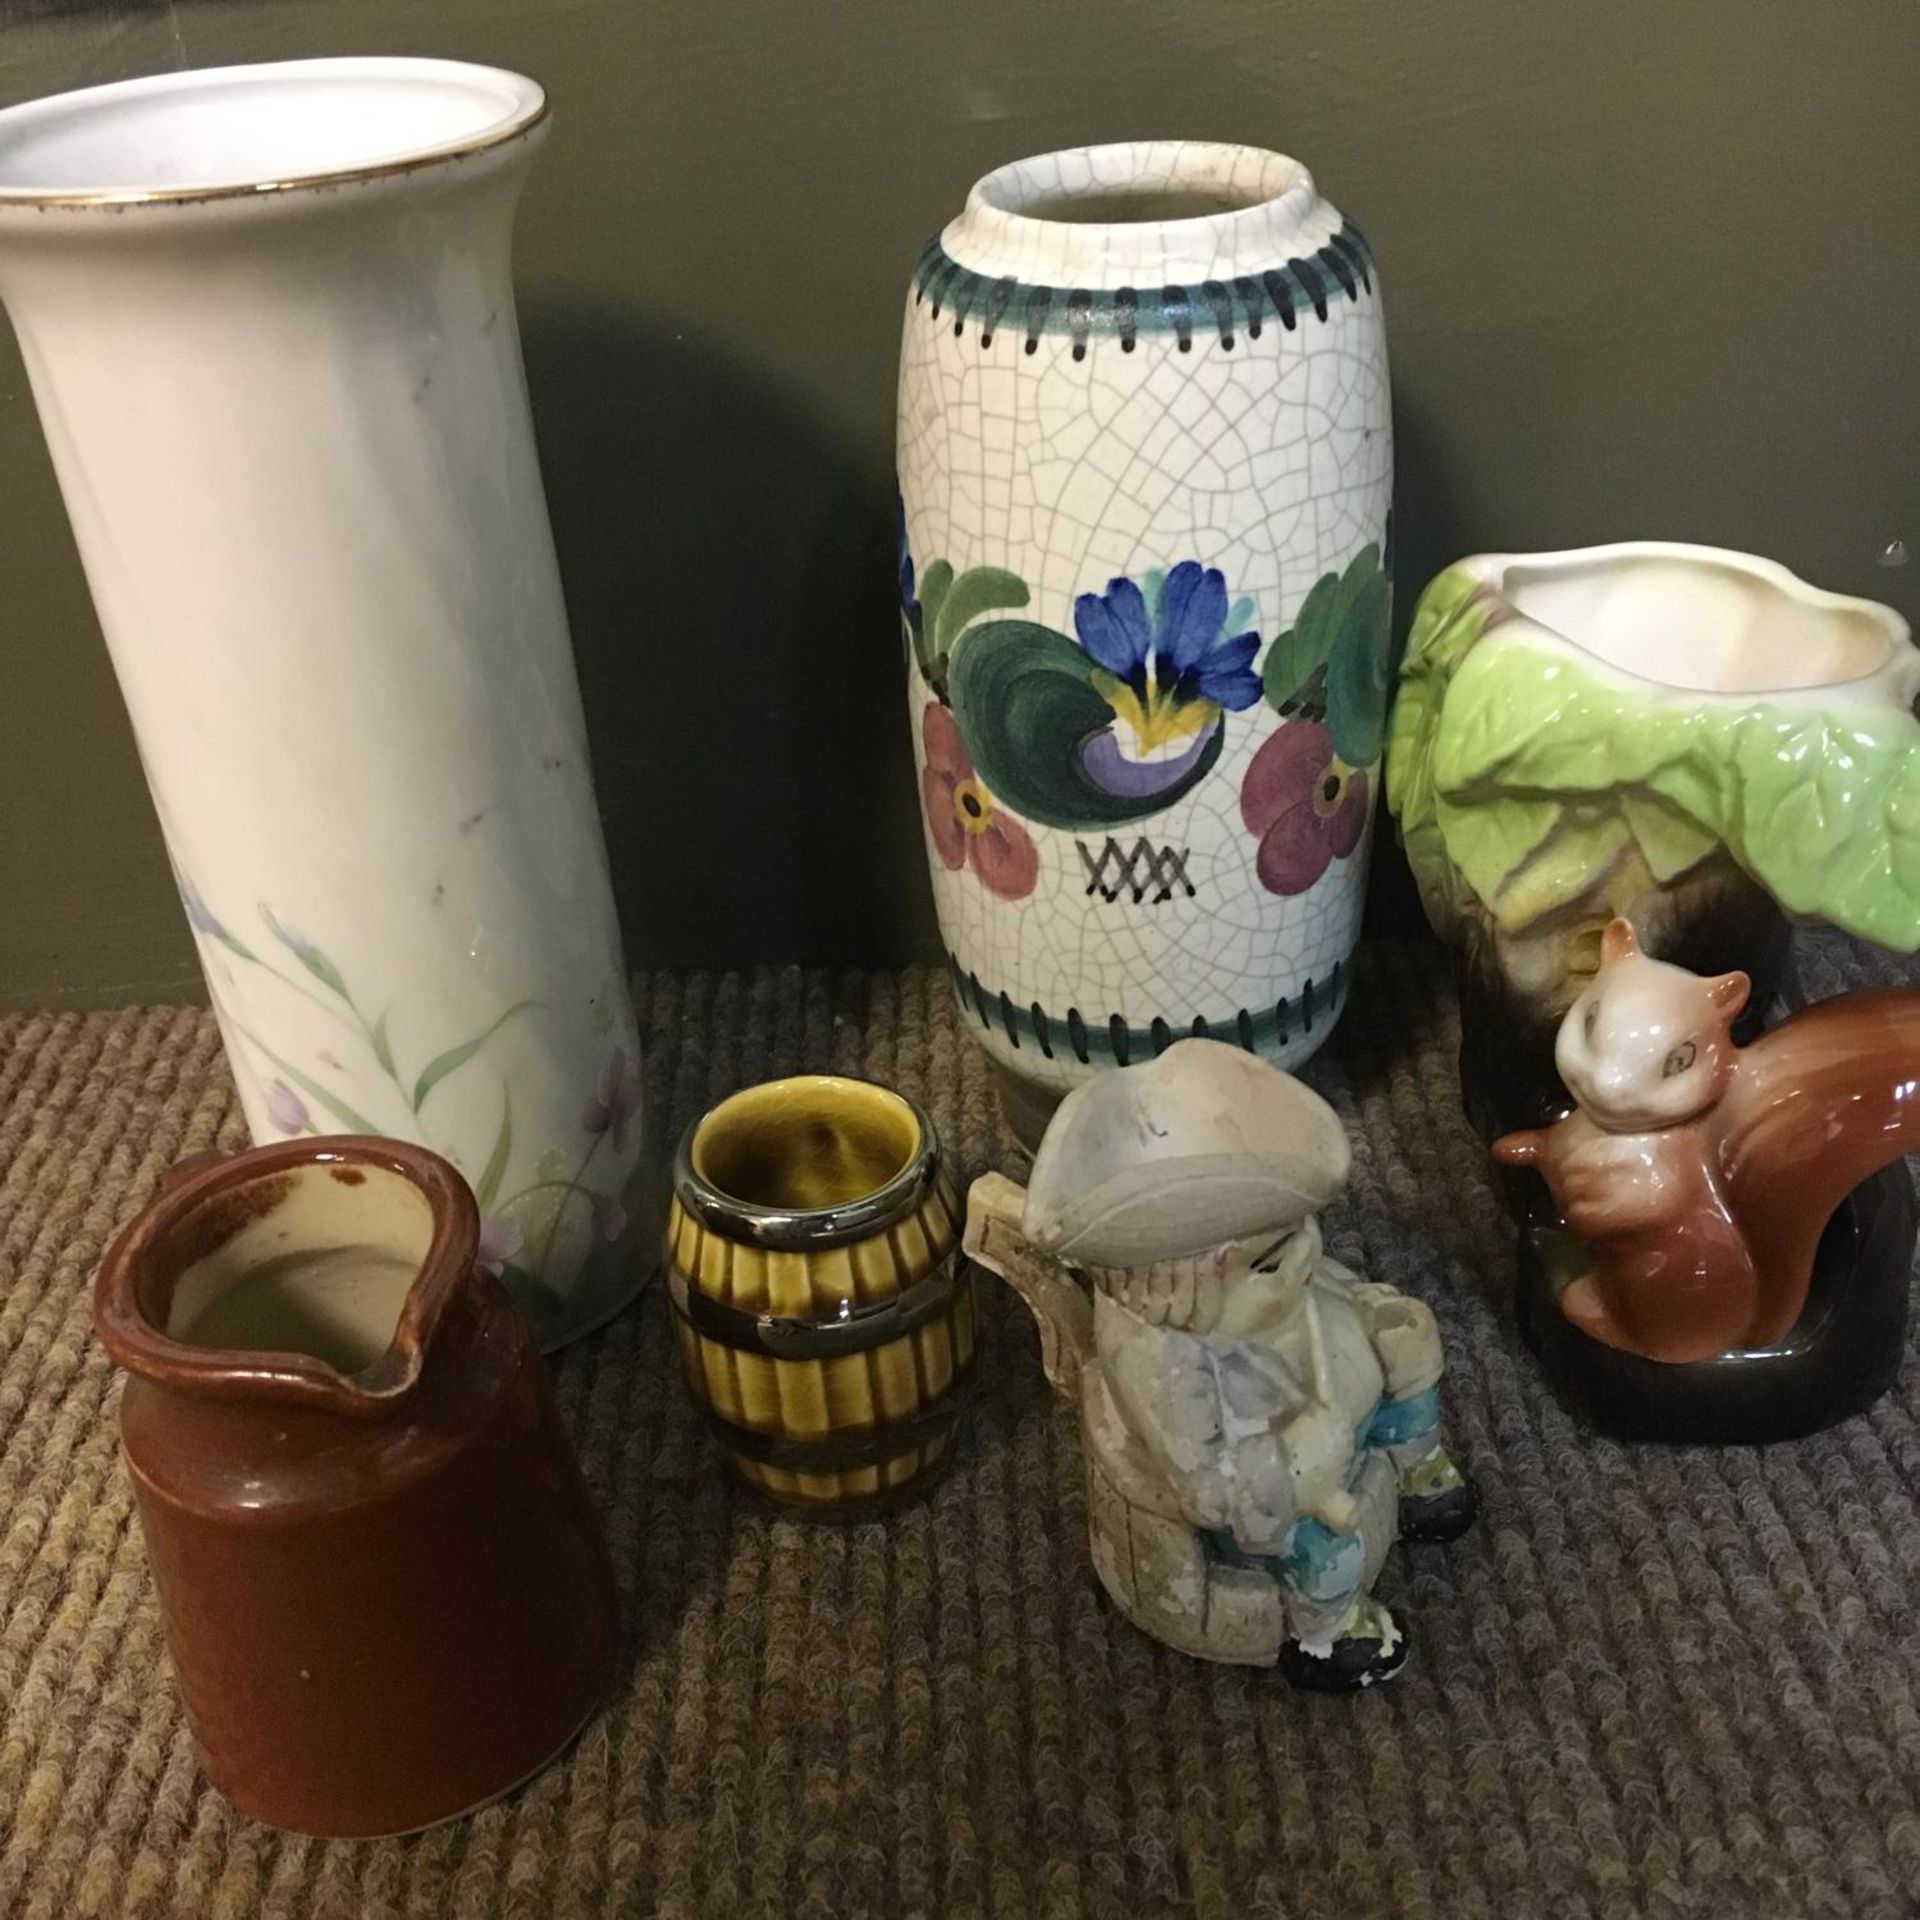 Froup of Vases and Jugs - All in Good Condition